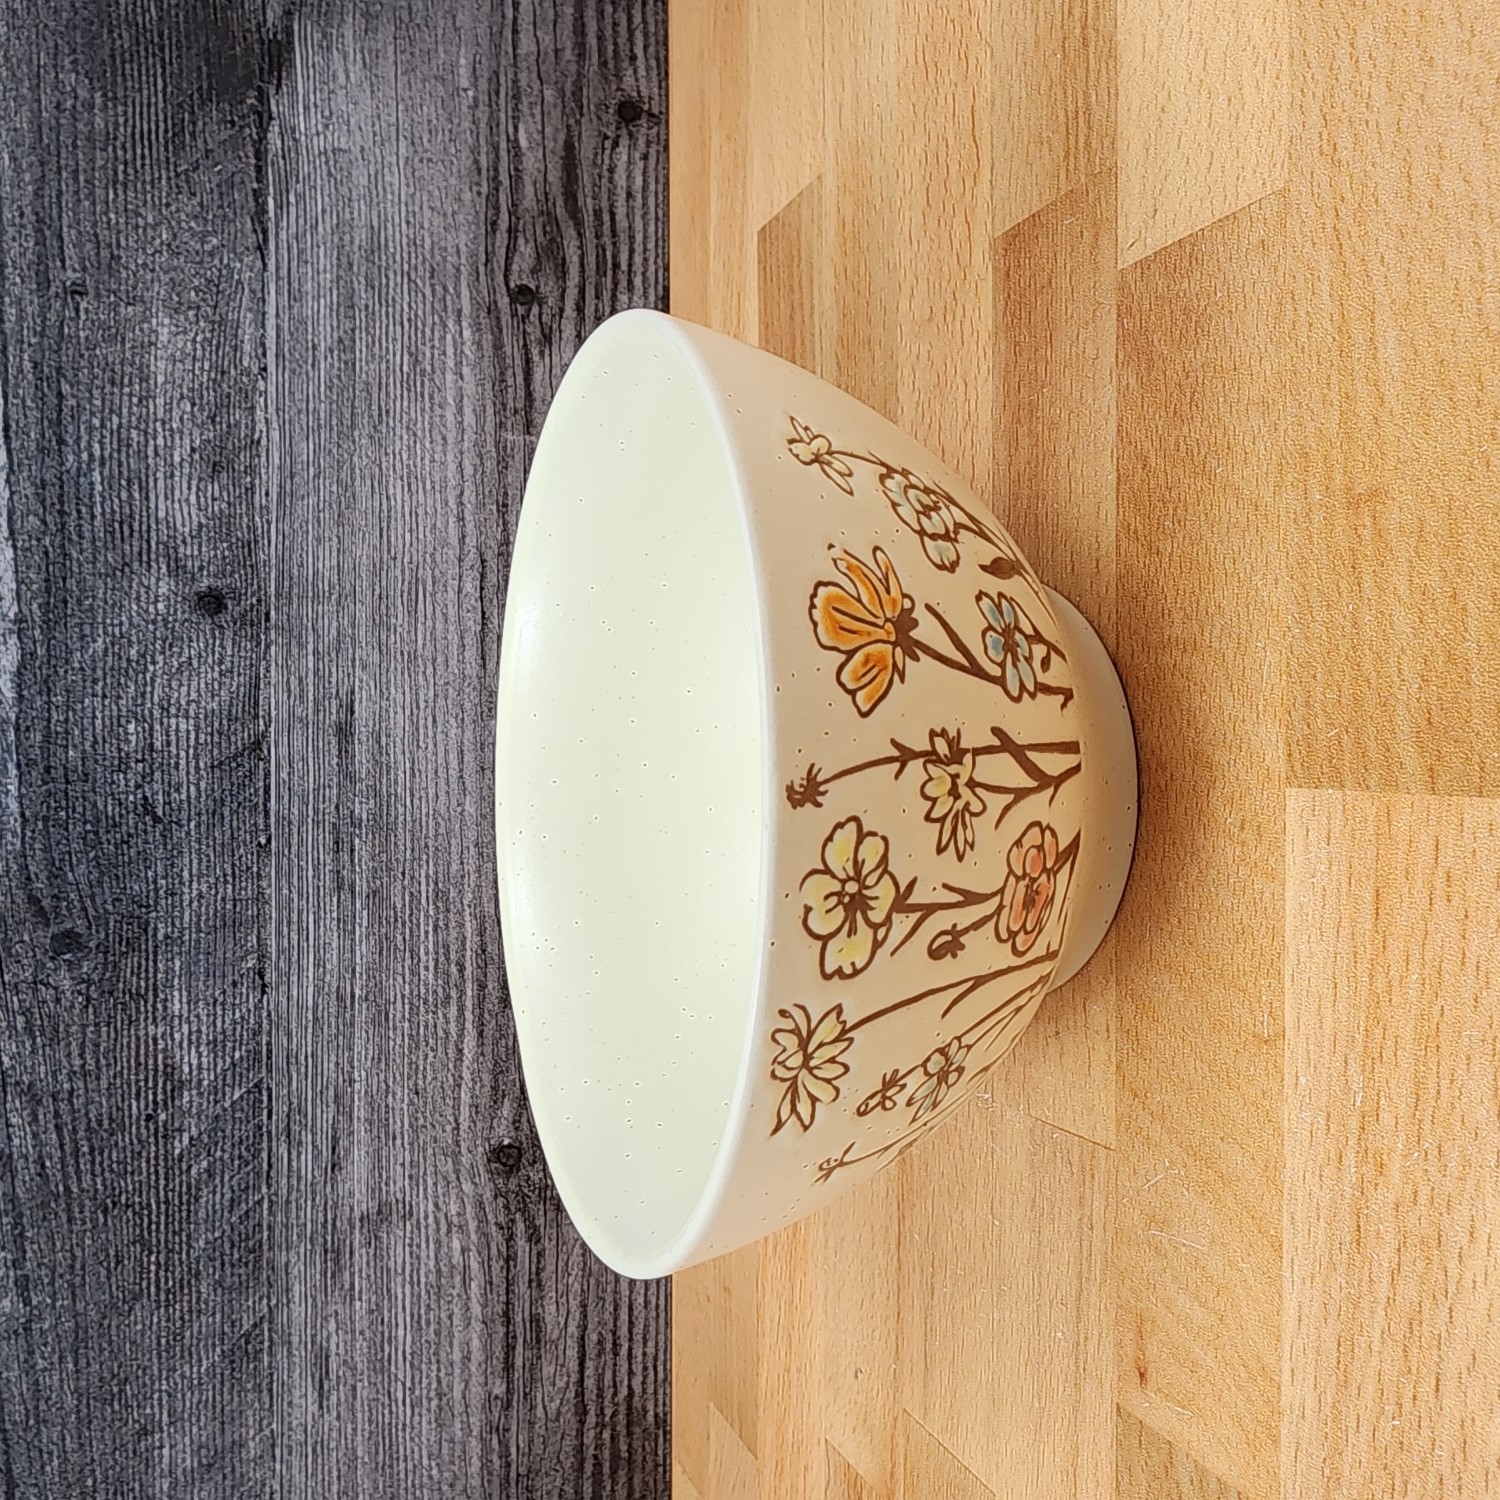 This Valley Floral Embossed Serving Bowl Decorative by Blue Sky 7in (17cm) is made with love by Premier Homegoods! Shop more unique gift ideas today with Spots Initiatives, the best way to support creators.